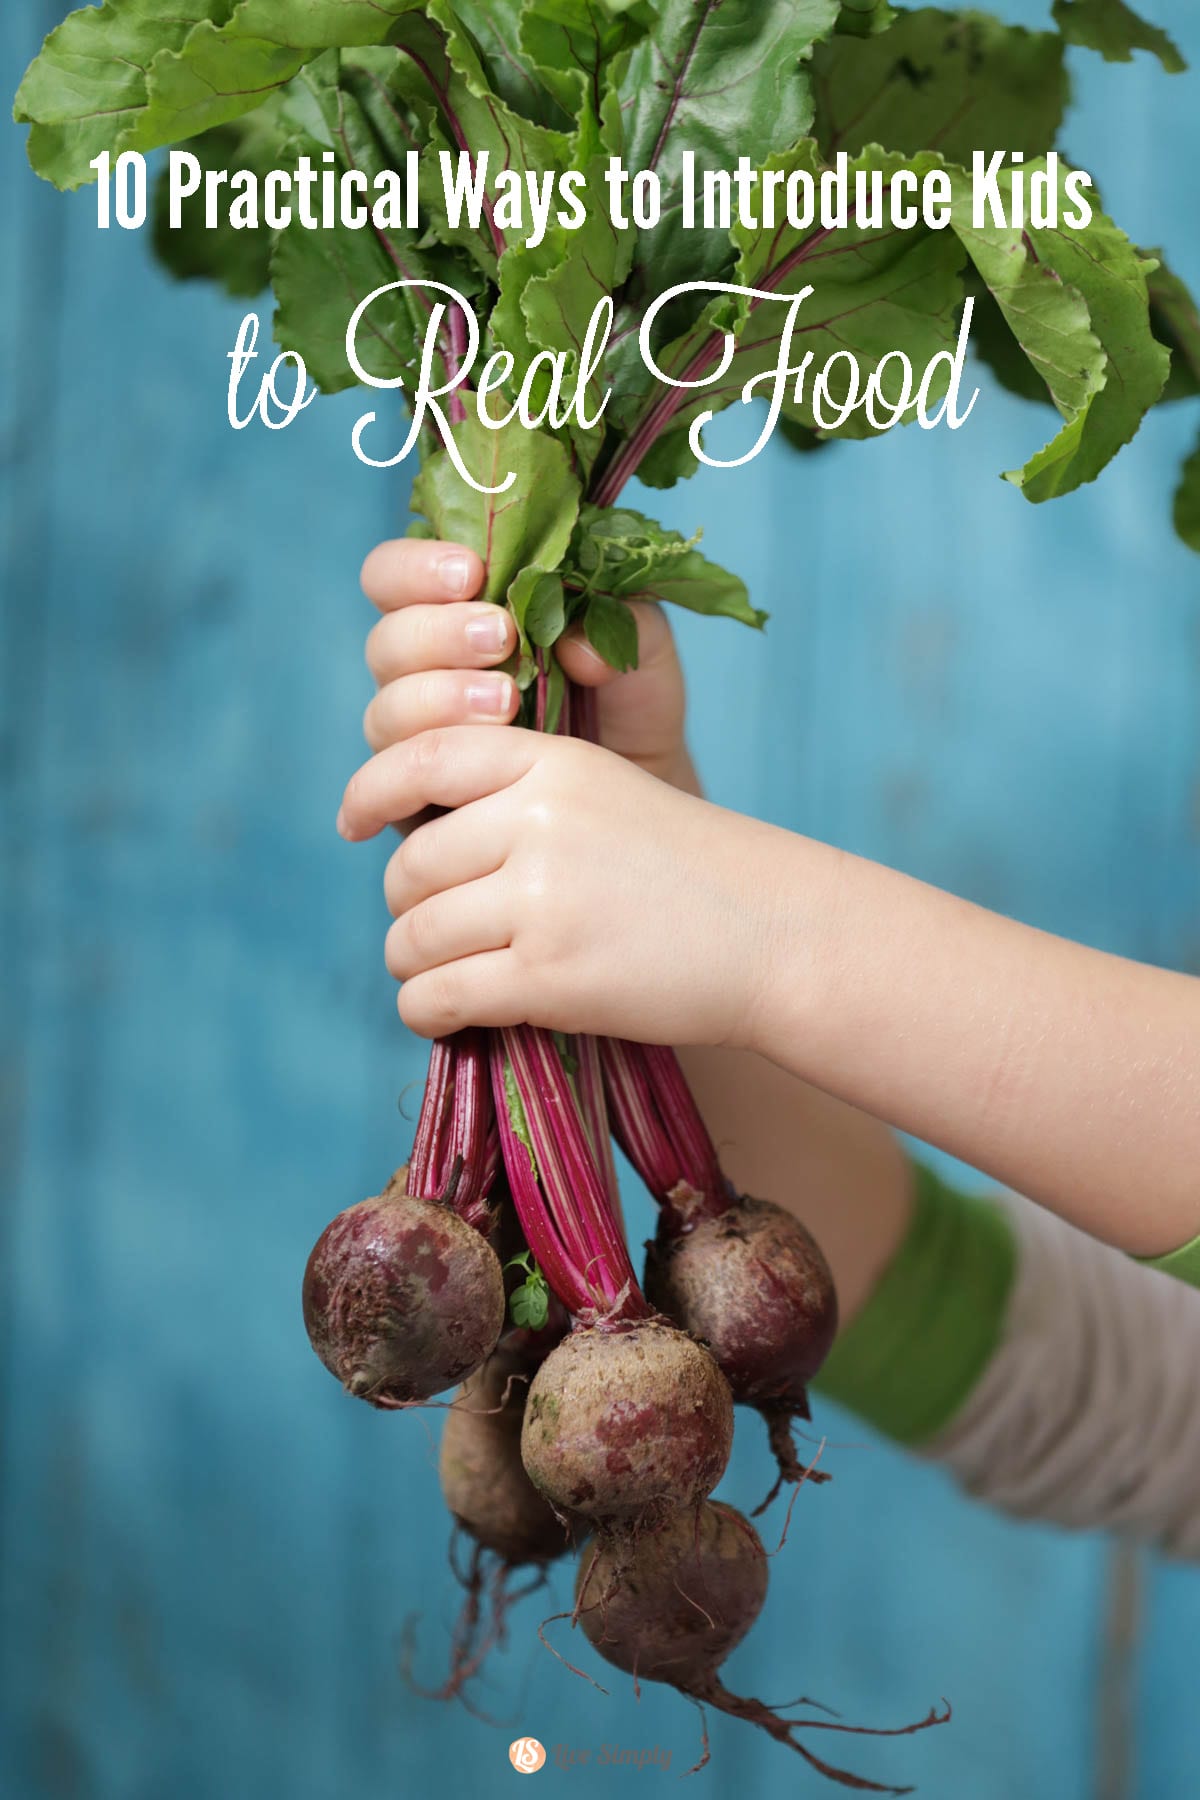 10 Practical Ways to Introduce Kids to Real Food